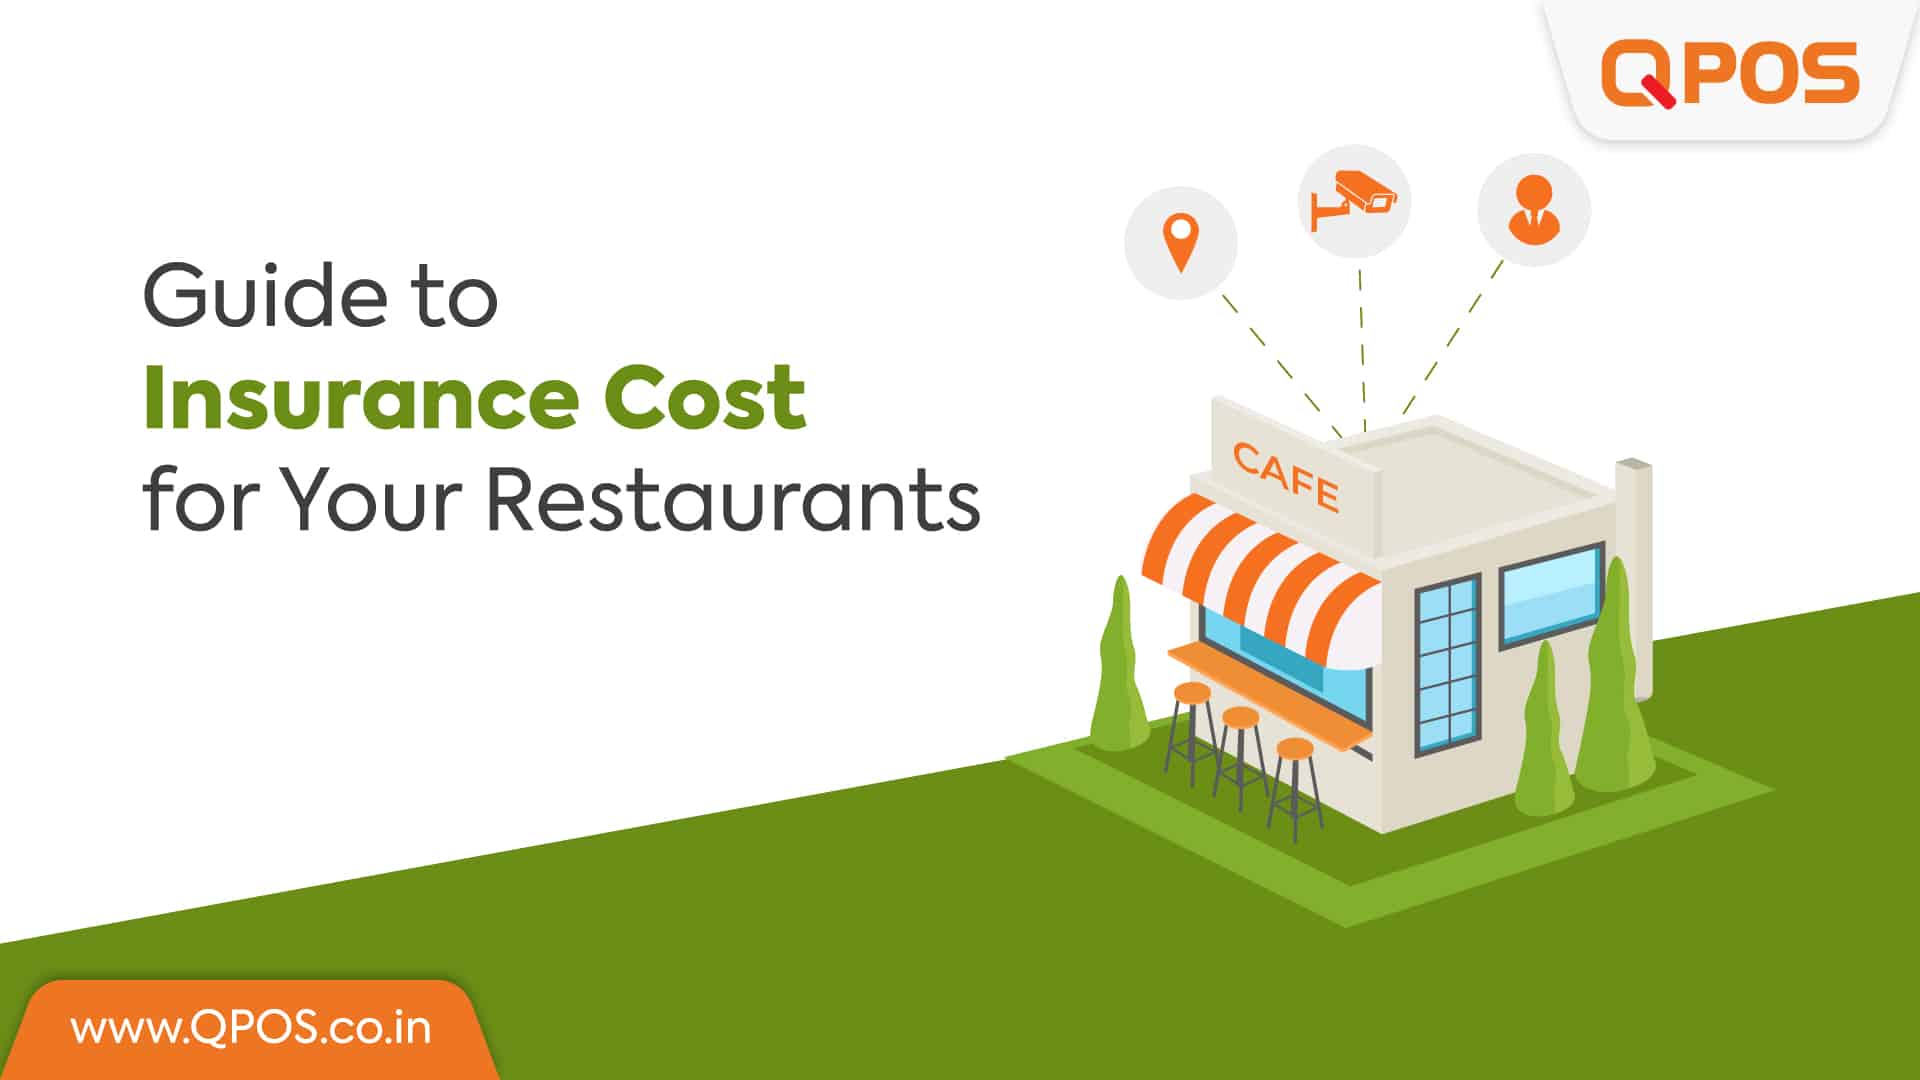 Guide to Insurance Cost for Your Restaurants